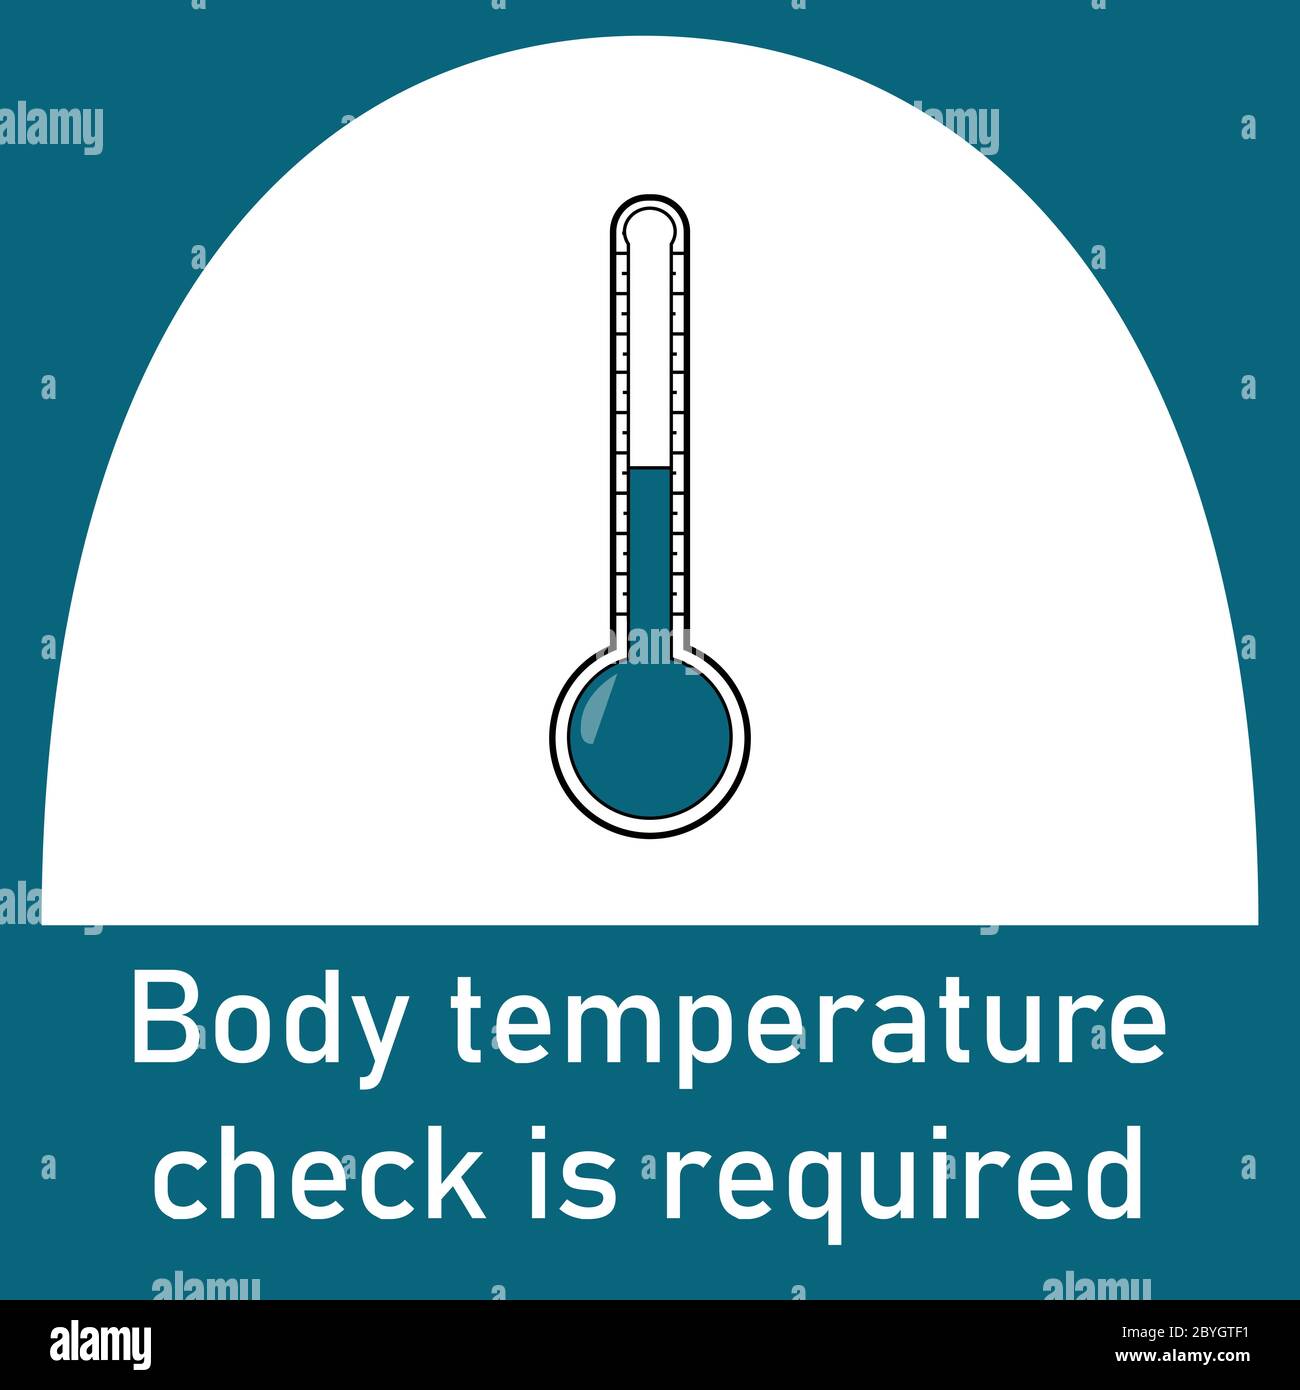 https://c8.alamy.com/comp/2BYGTF1/vector-illustration-of-a-thermometer-and-the-text-body-temperature-check-is-required-covid-19-coronavirus-prevention-measure-new-normal-2BYGTF1.jpg